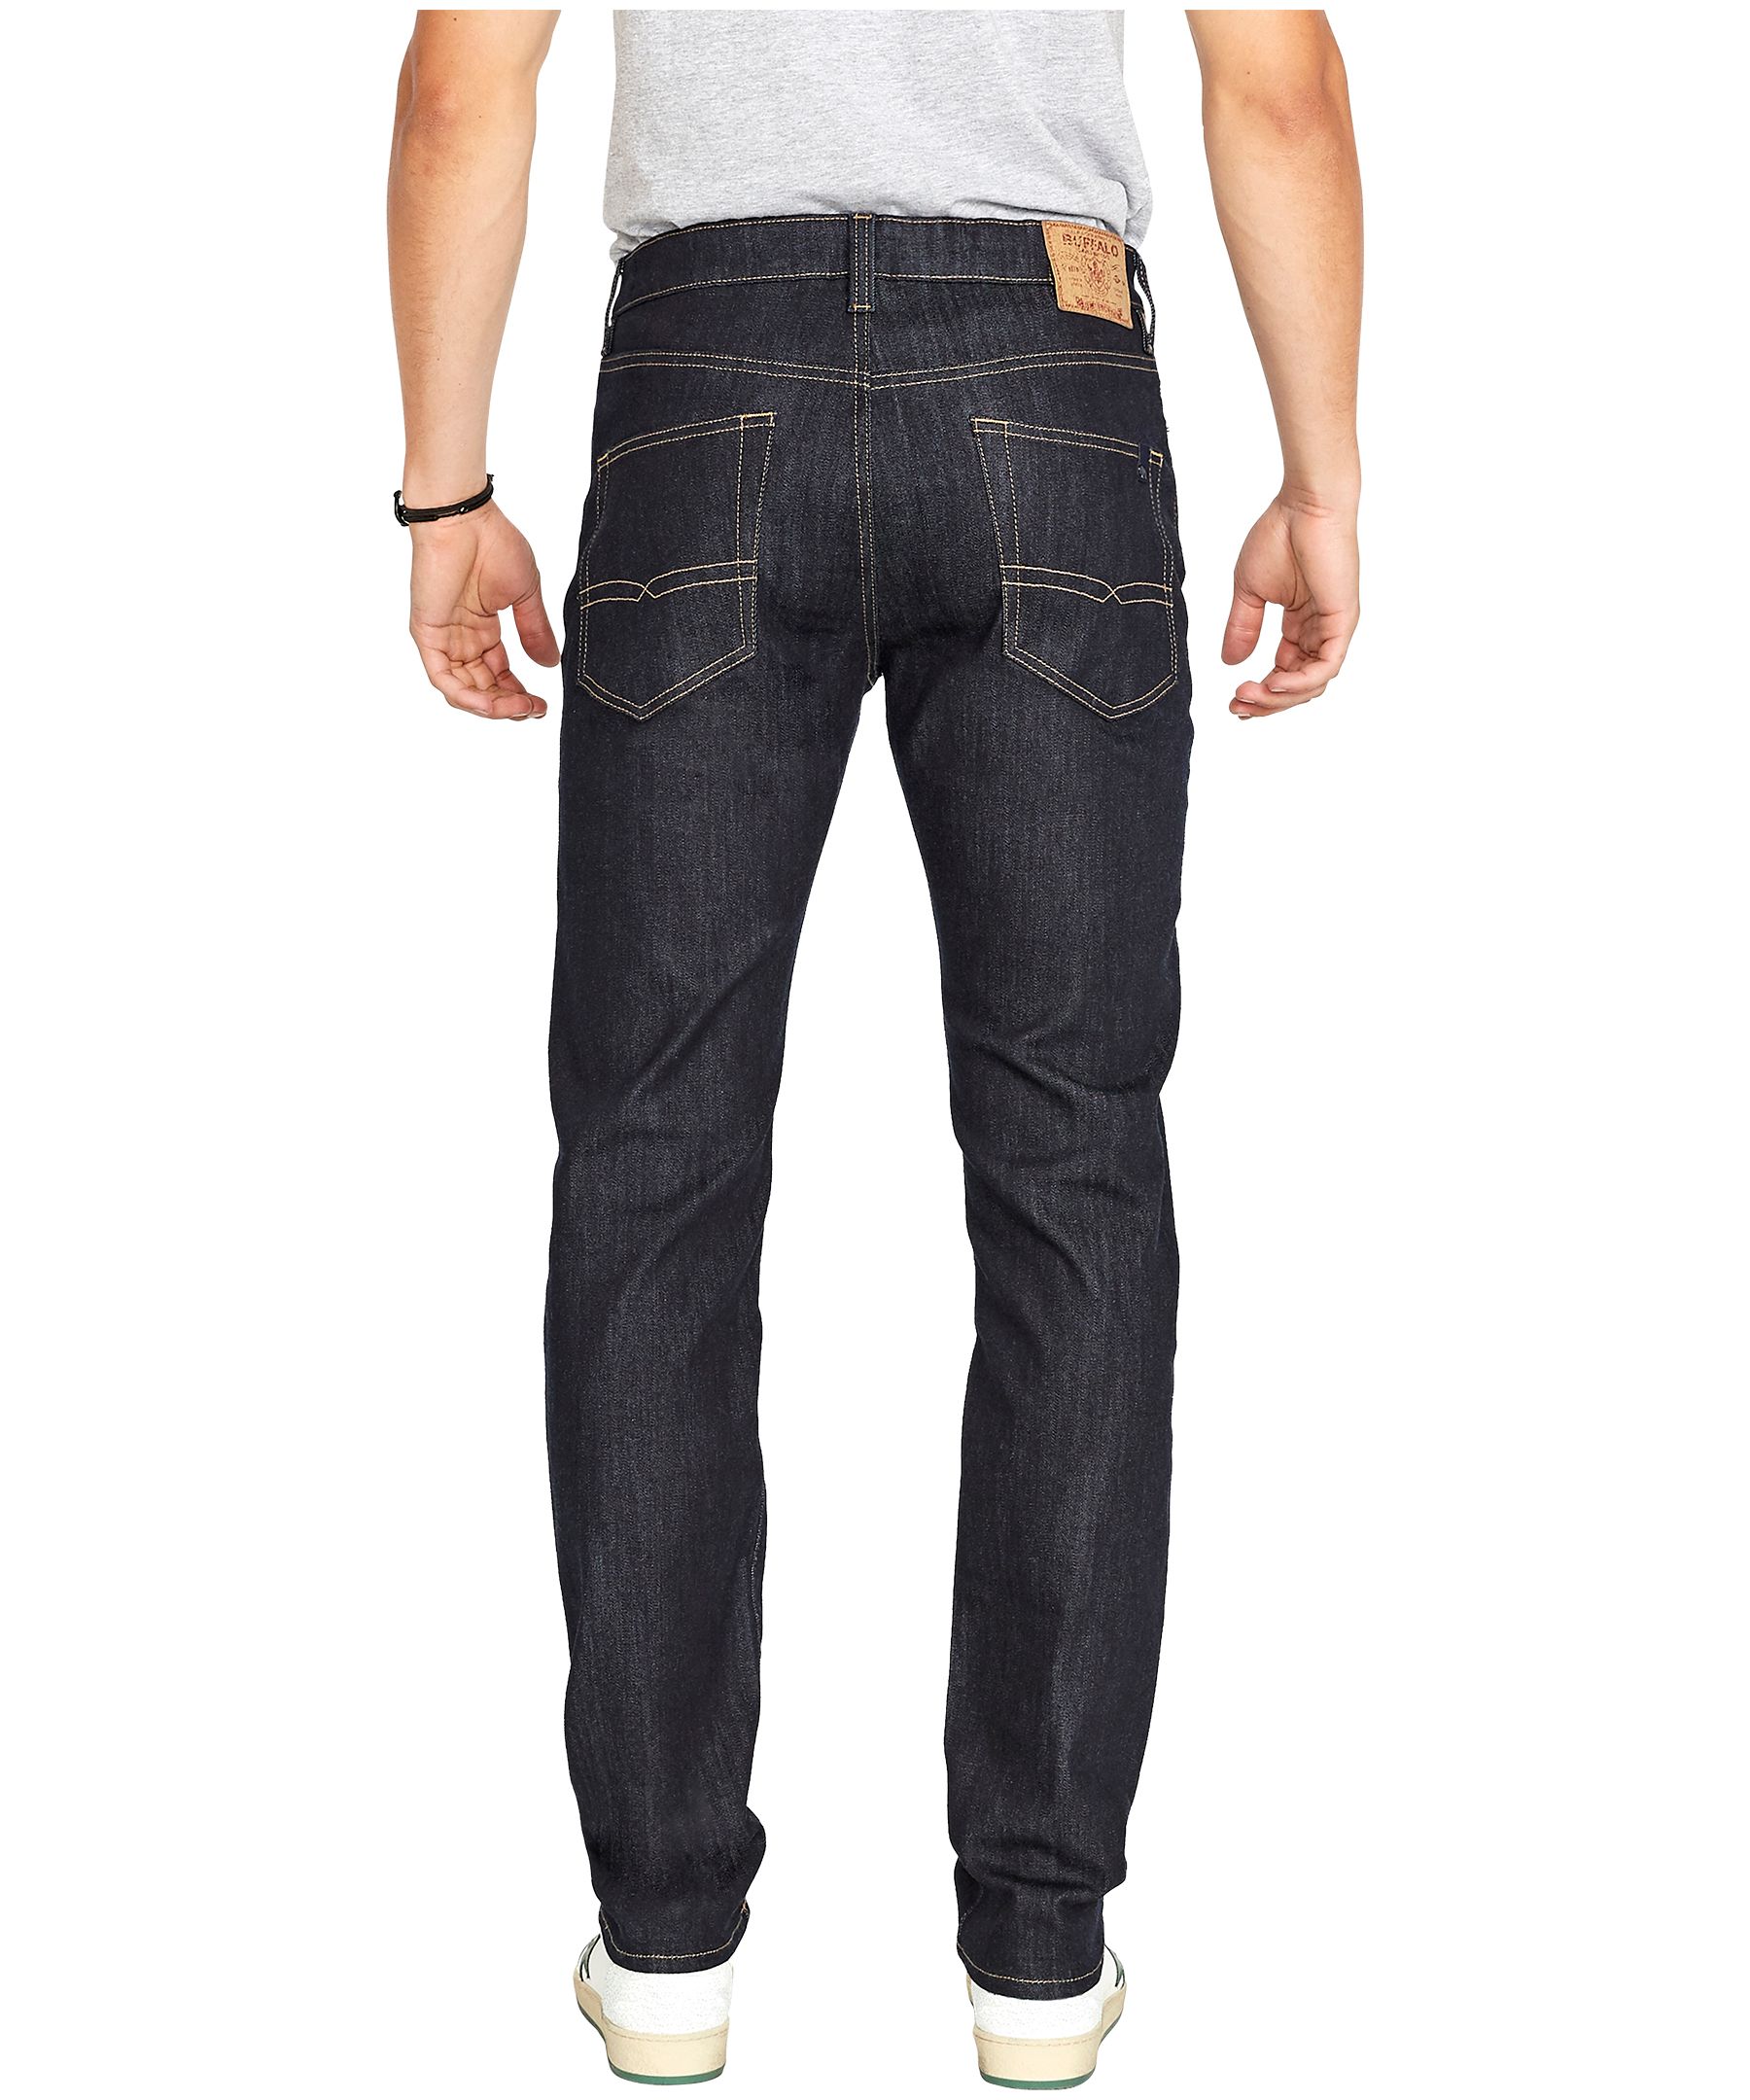 Buffalo Men's Ben Relaxed Fit Tapered Jeans